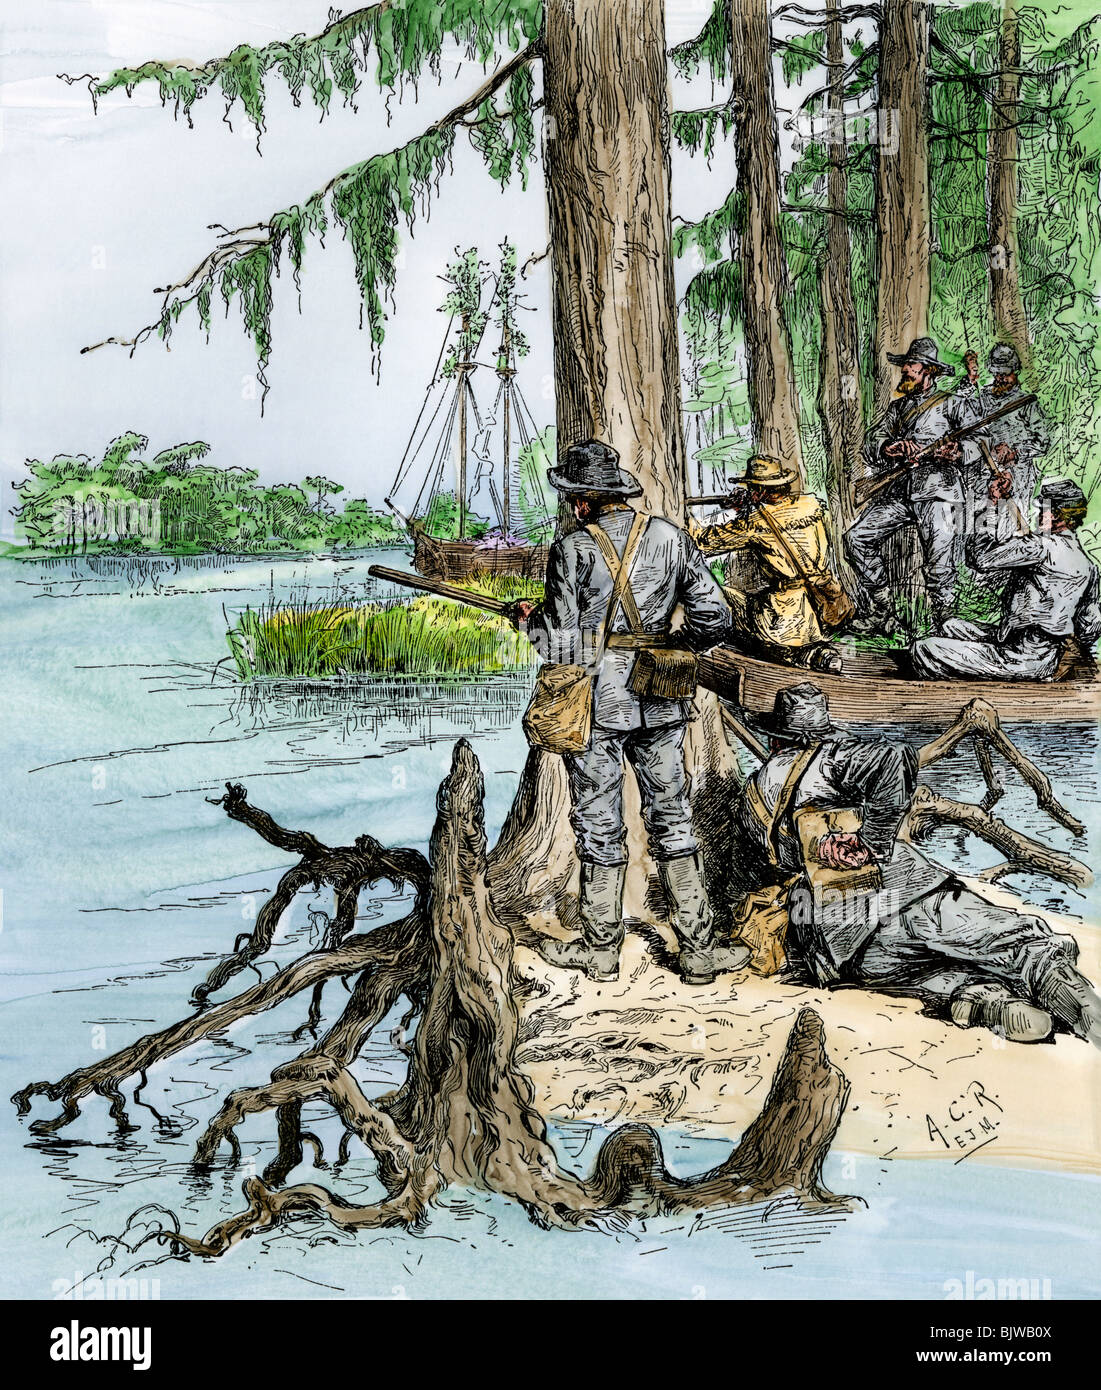 Swamp-hunters attacking Union mortar-boats on Mississippi River, Battle of New Orleans, 1862. Hand-colored woodcut Stock Photo